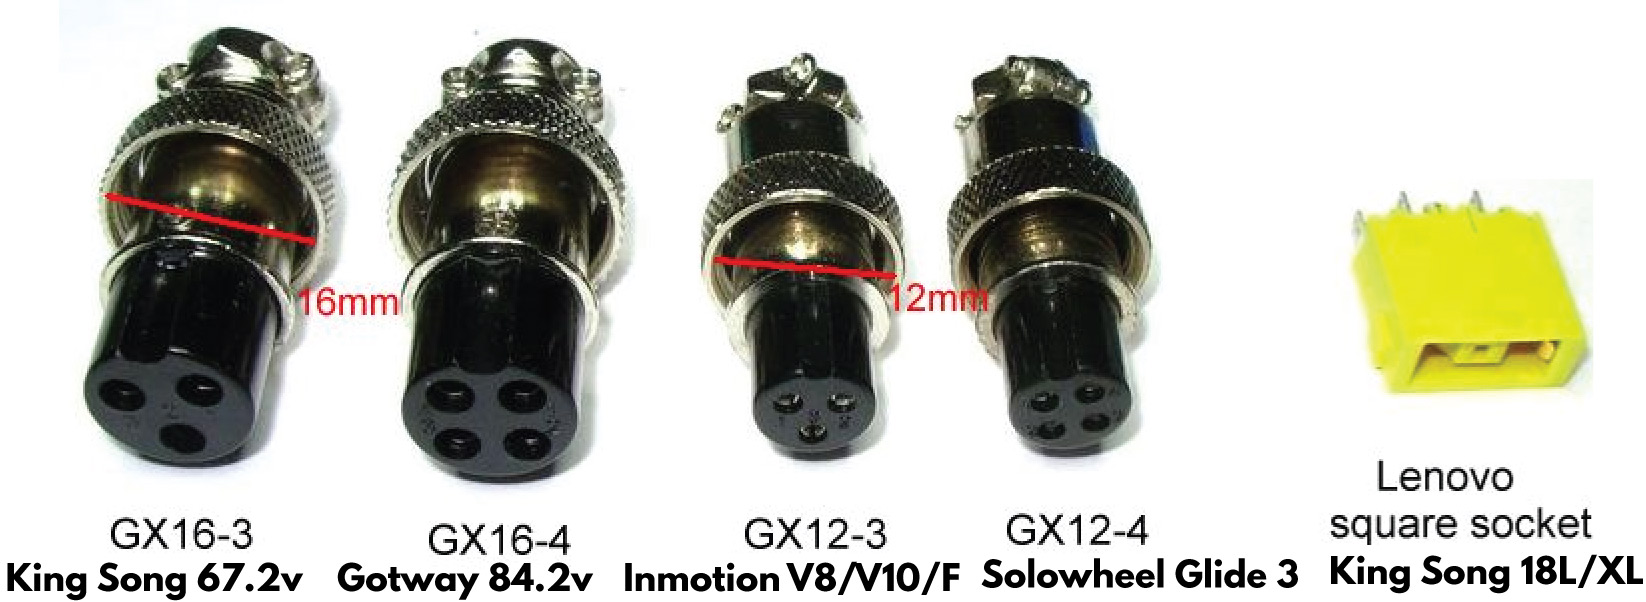 Electric Unicycle Charger Connectors Compared